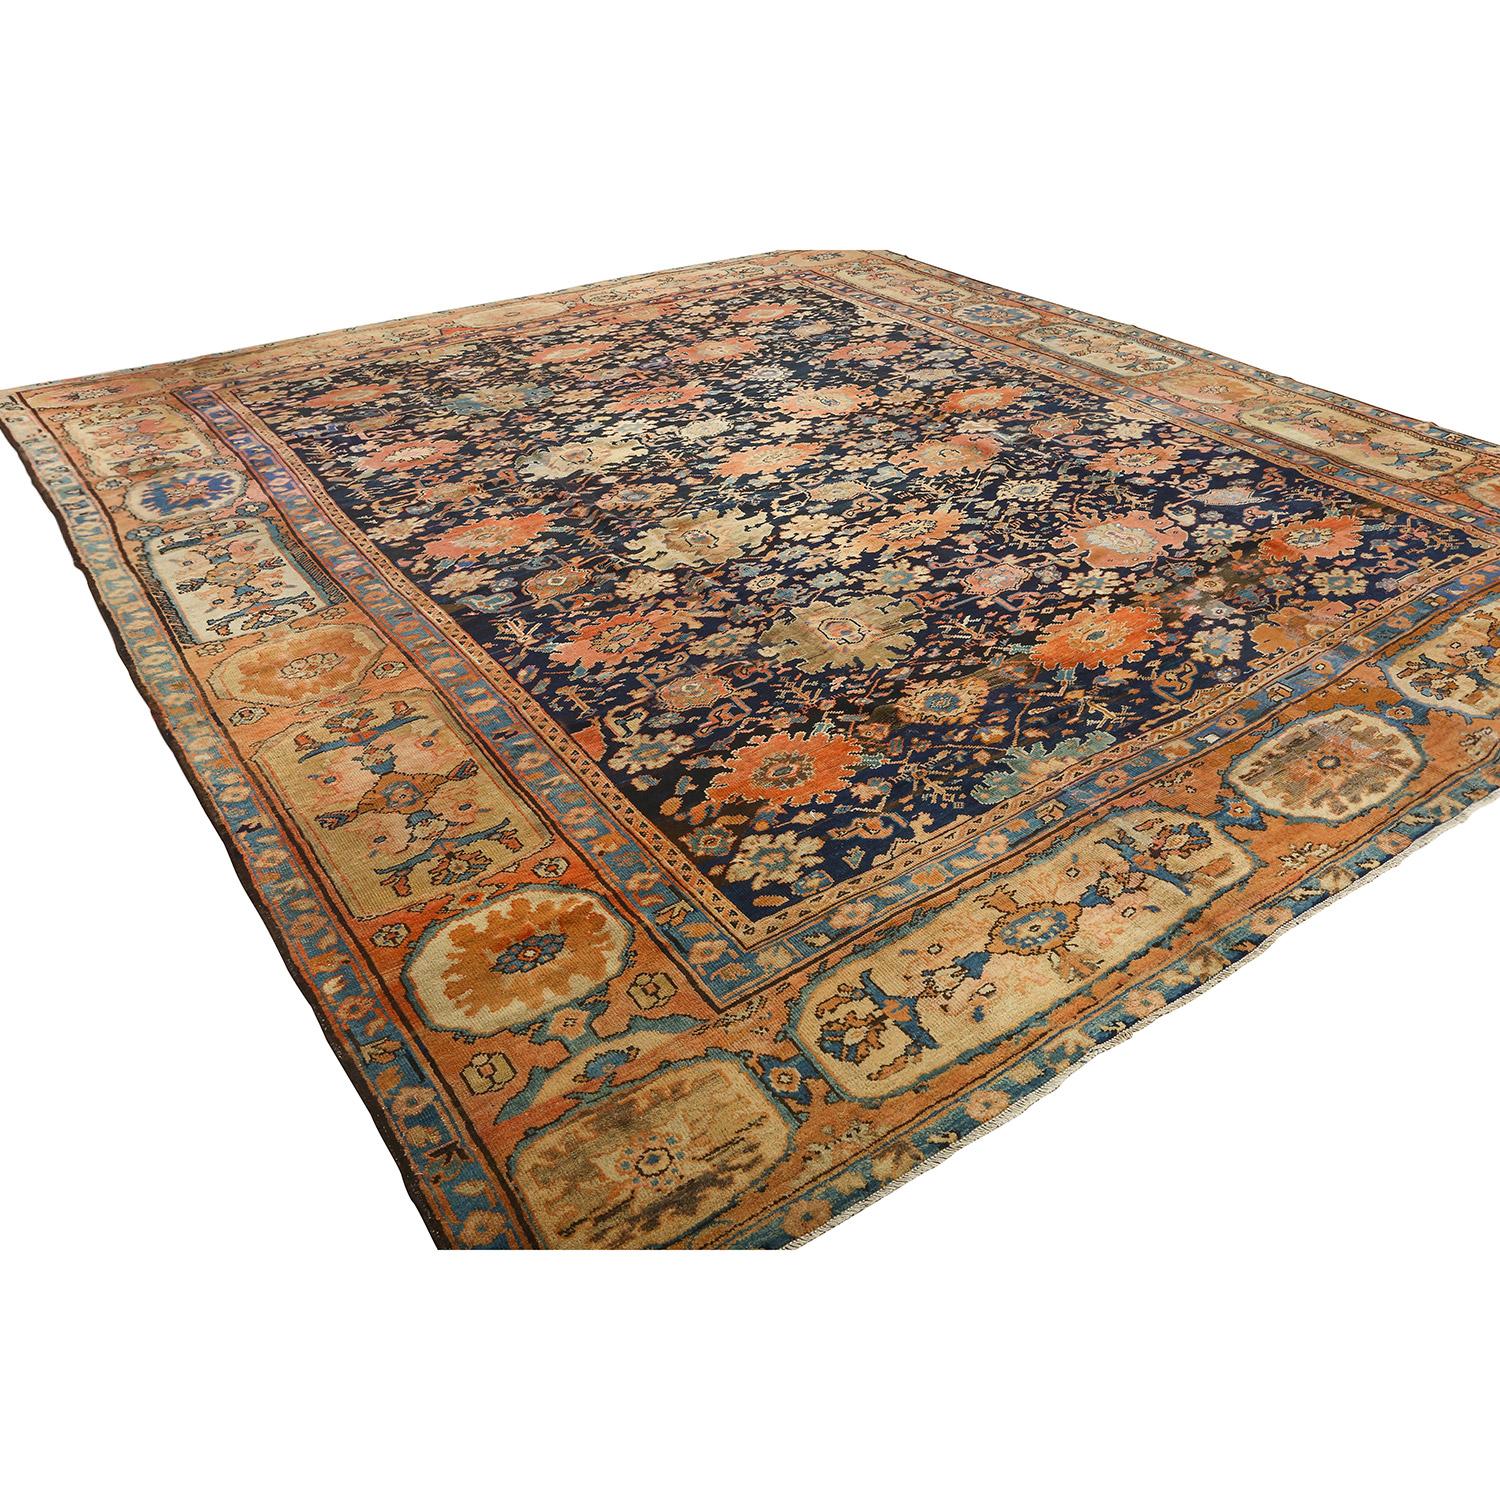 This Antique Ziglar Mahal Rug, sized at a generous 13 feet by 11 feet, is a living testament to the enduring appeal of Persian craftsmanship. Crafted with meticulous care, this rug boasts a woolen composition with a sturdy cotton foundation,